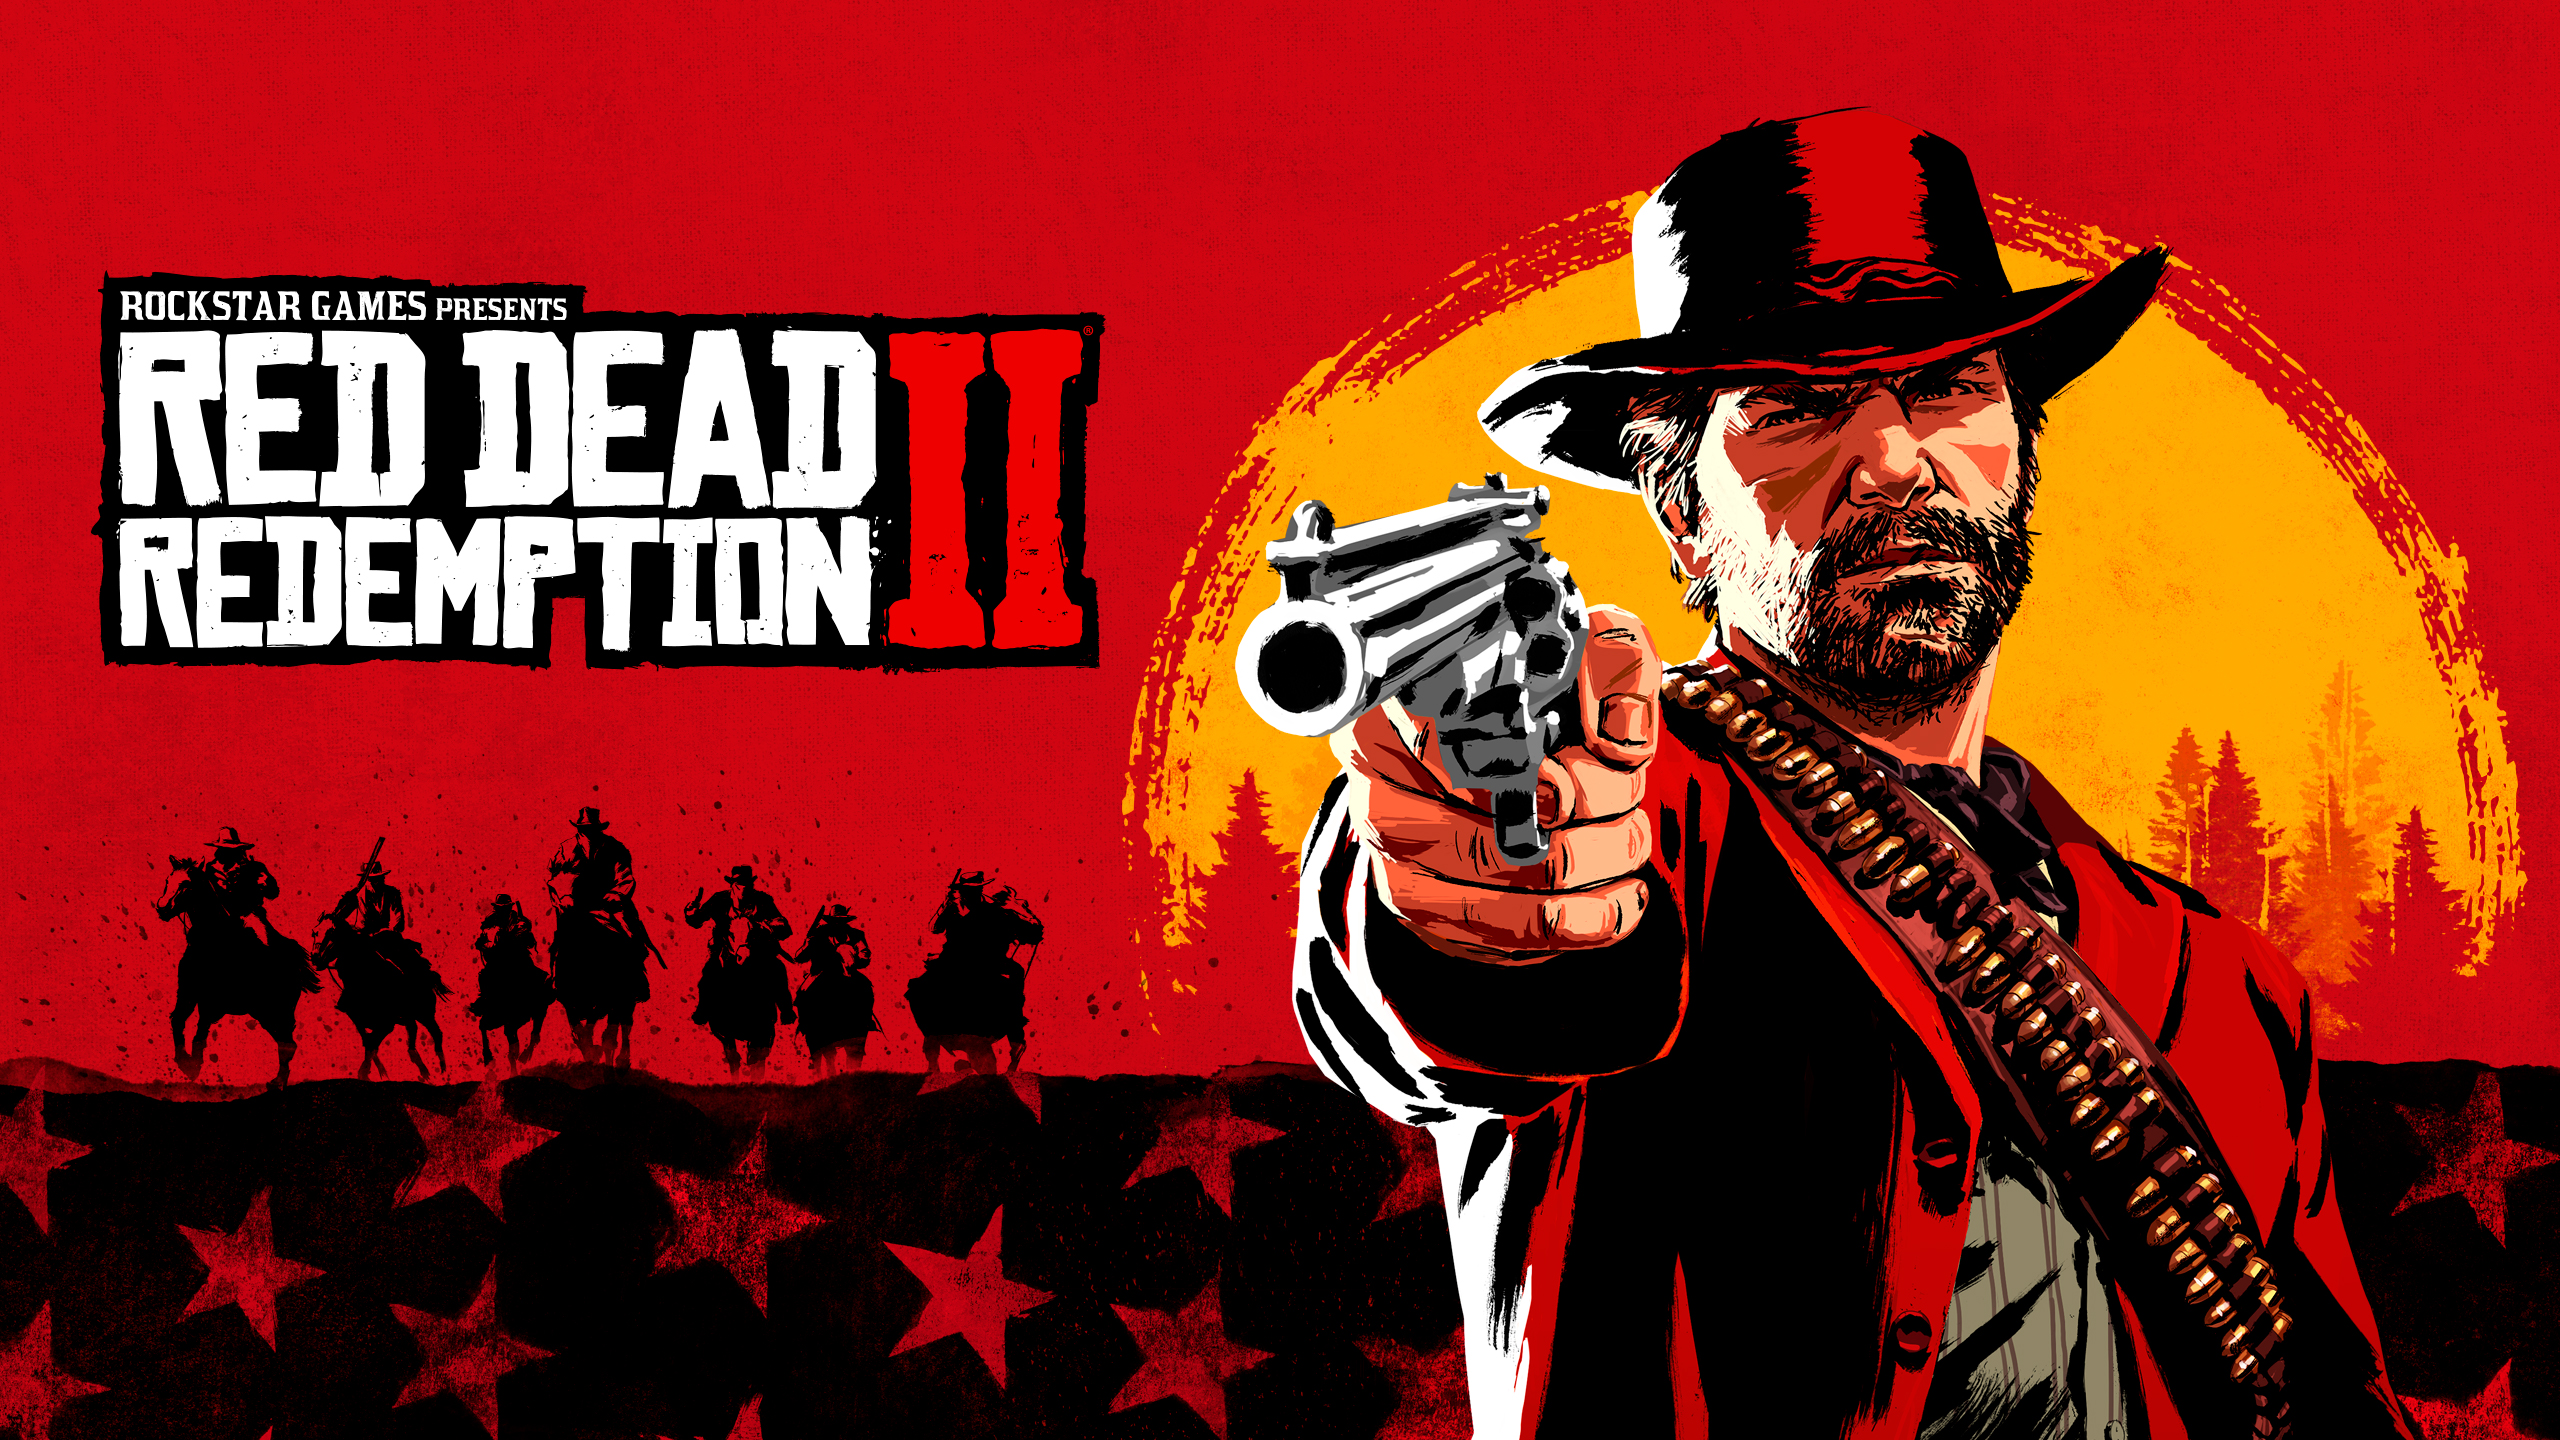 Dead Redemption – 100% Save Game - Games Manuals